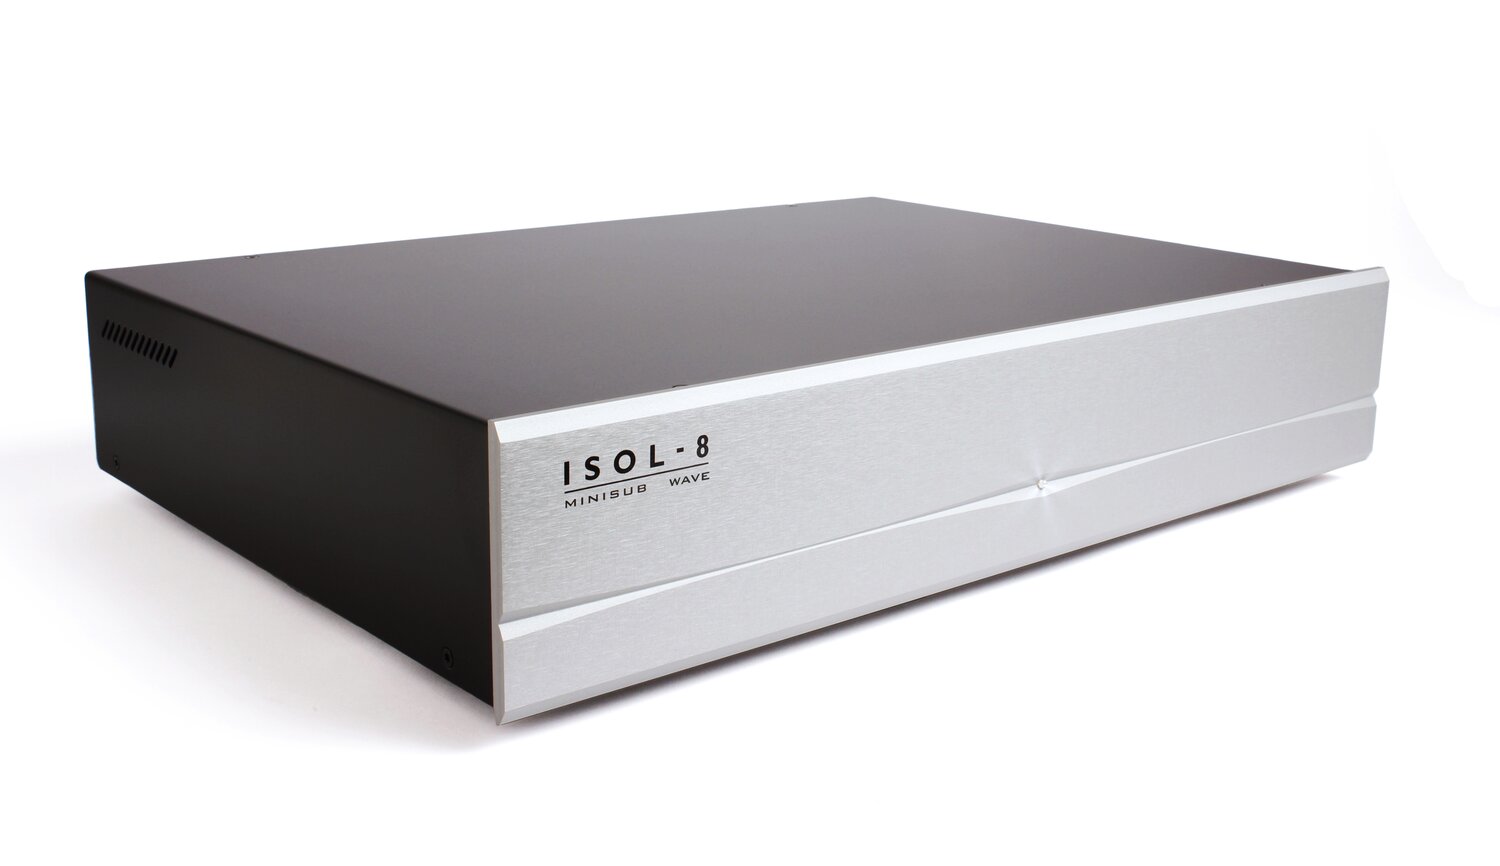 ISOL-8 MiniSub Wave power conditioner ISL-MS-WAVE